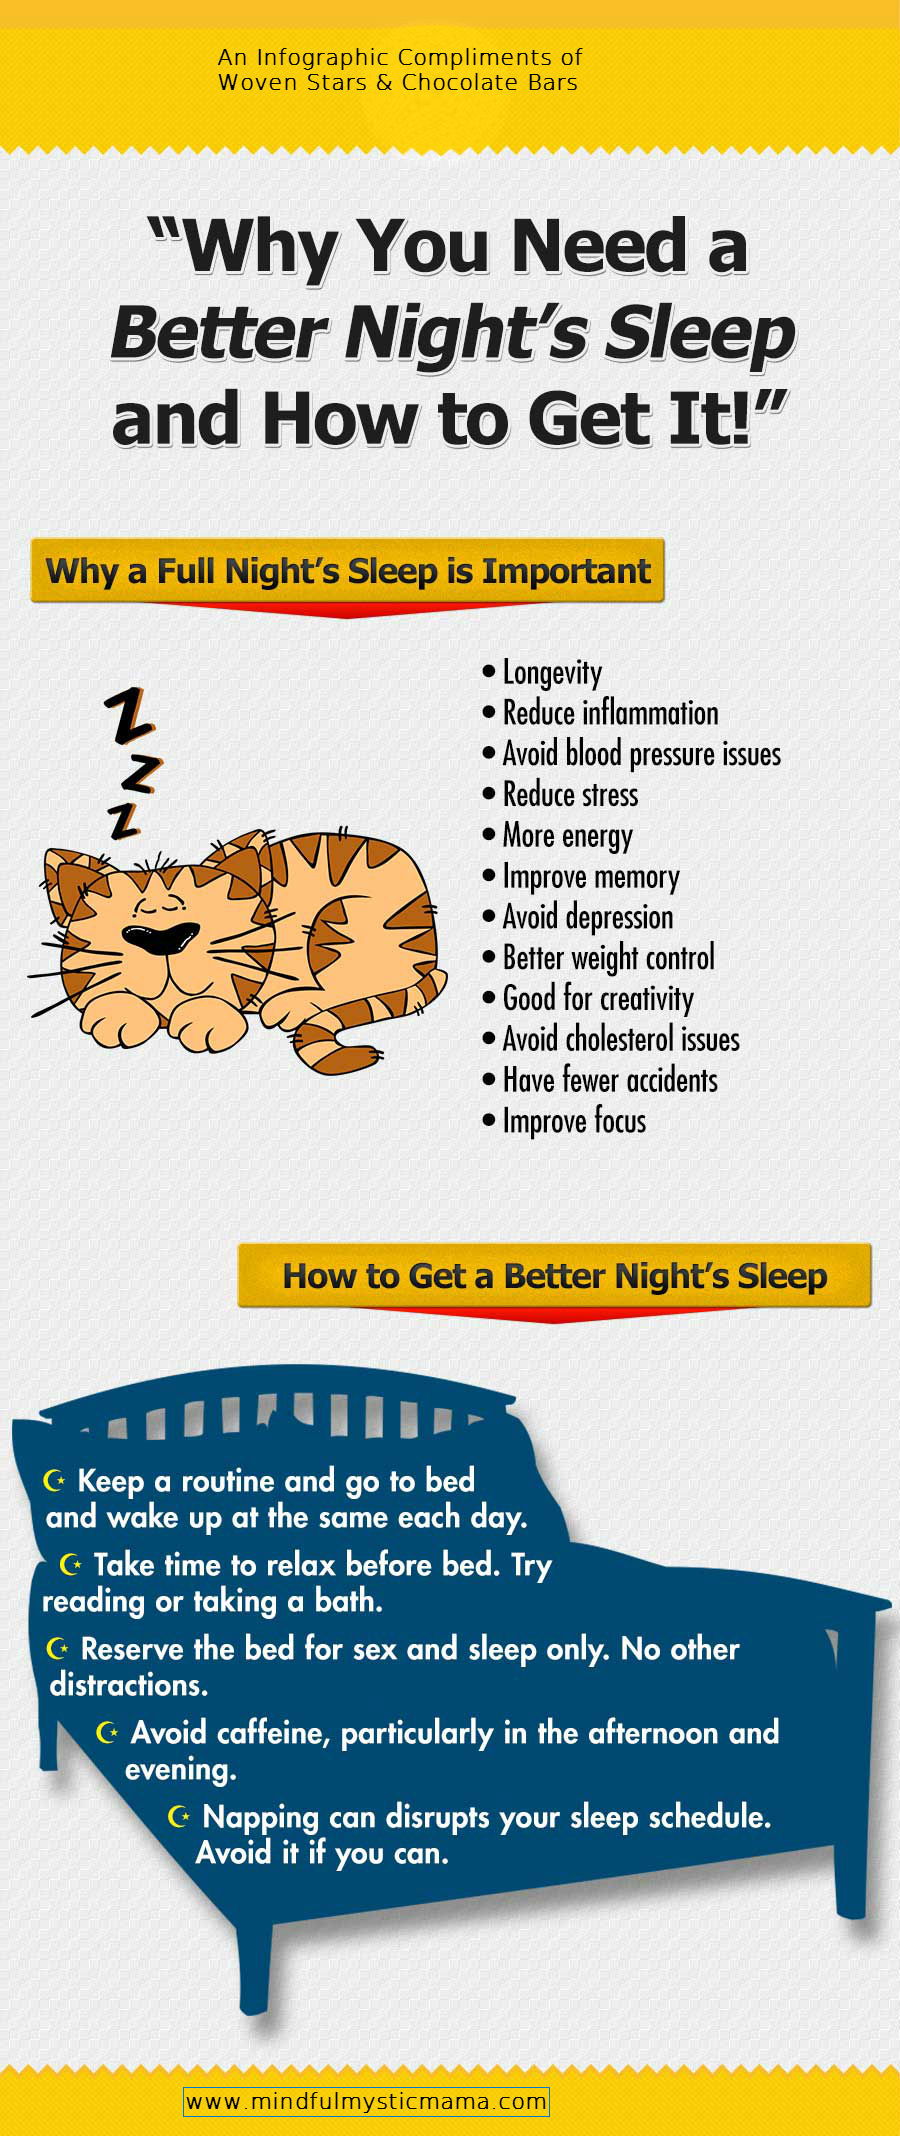 Why You Need a Better Night's Sleep and How to Get It